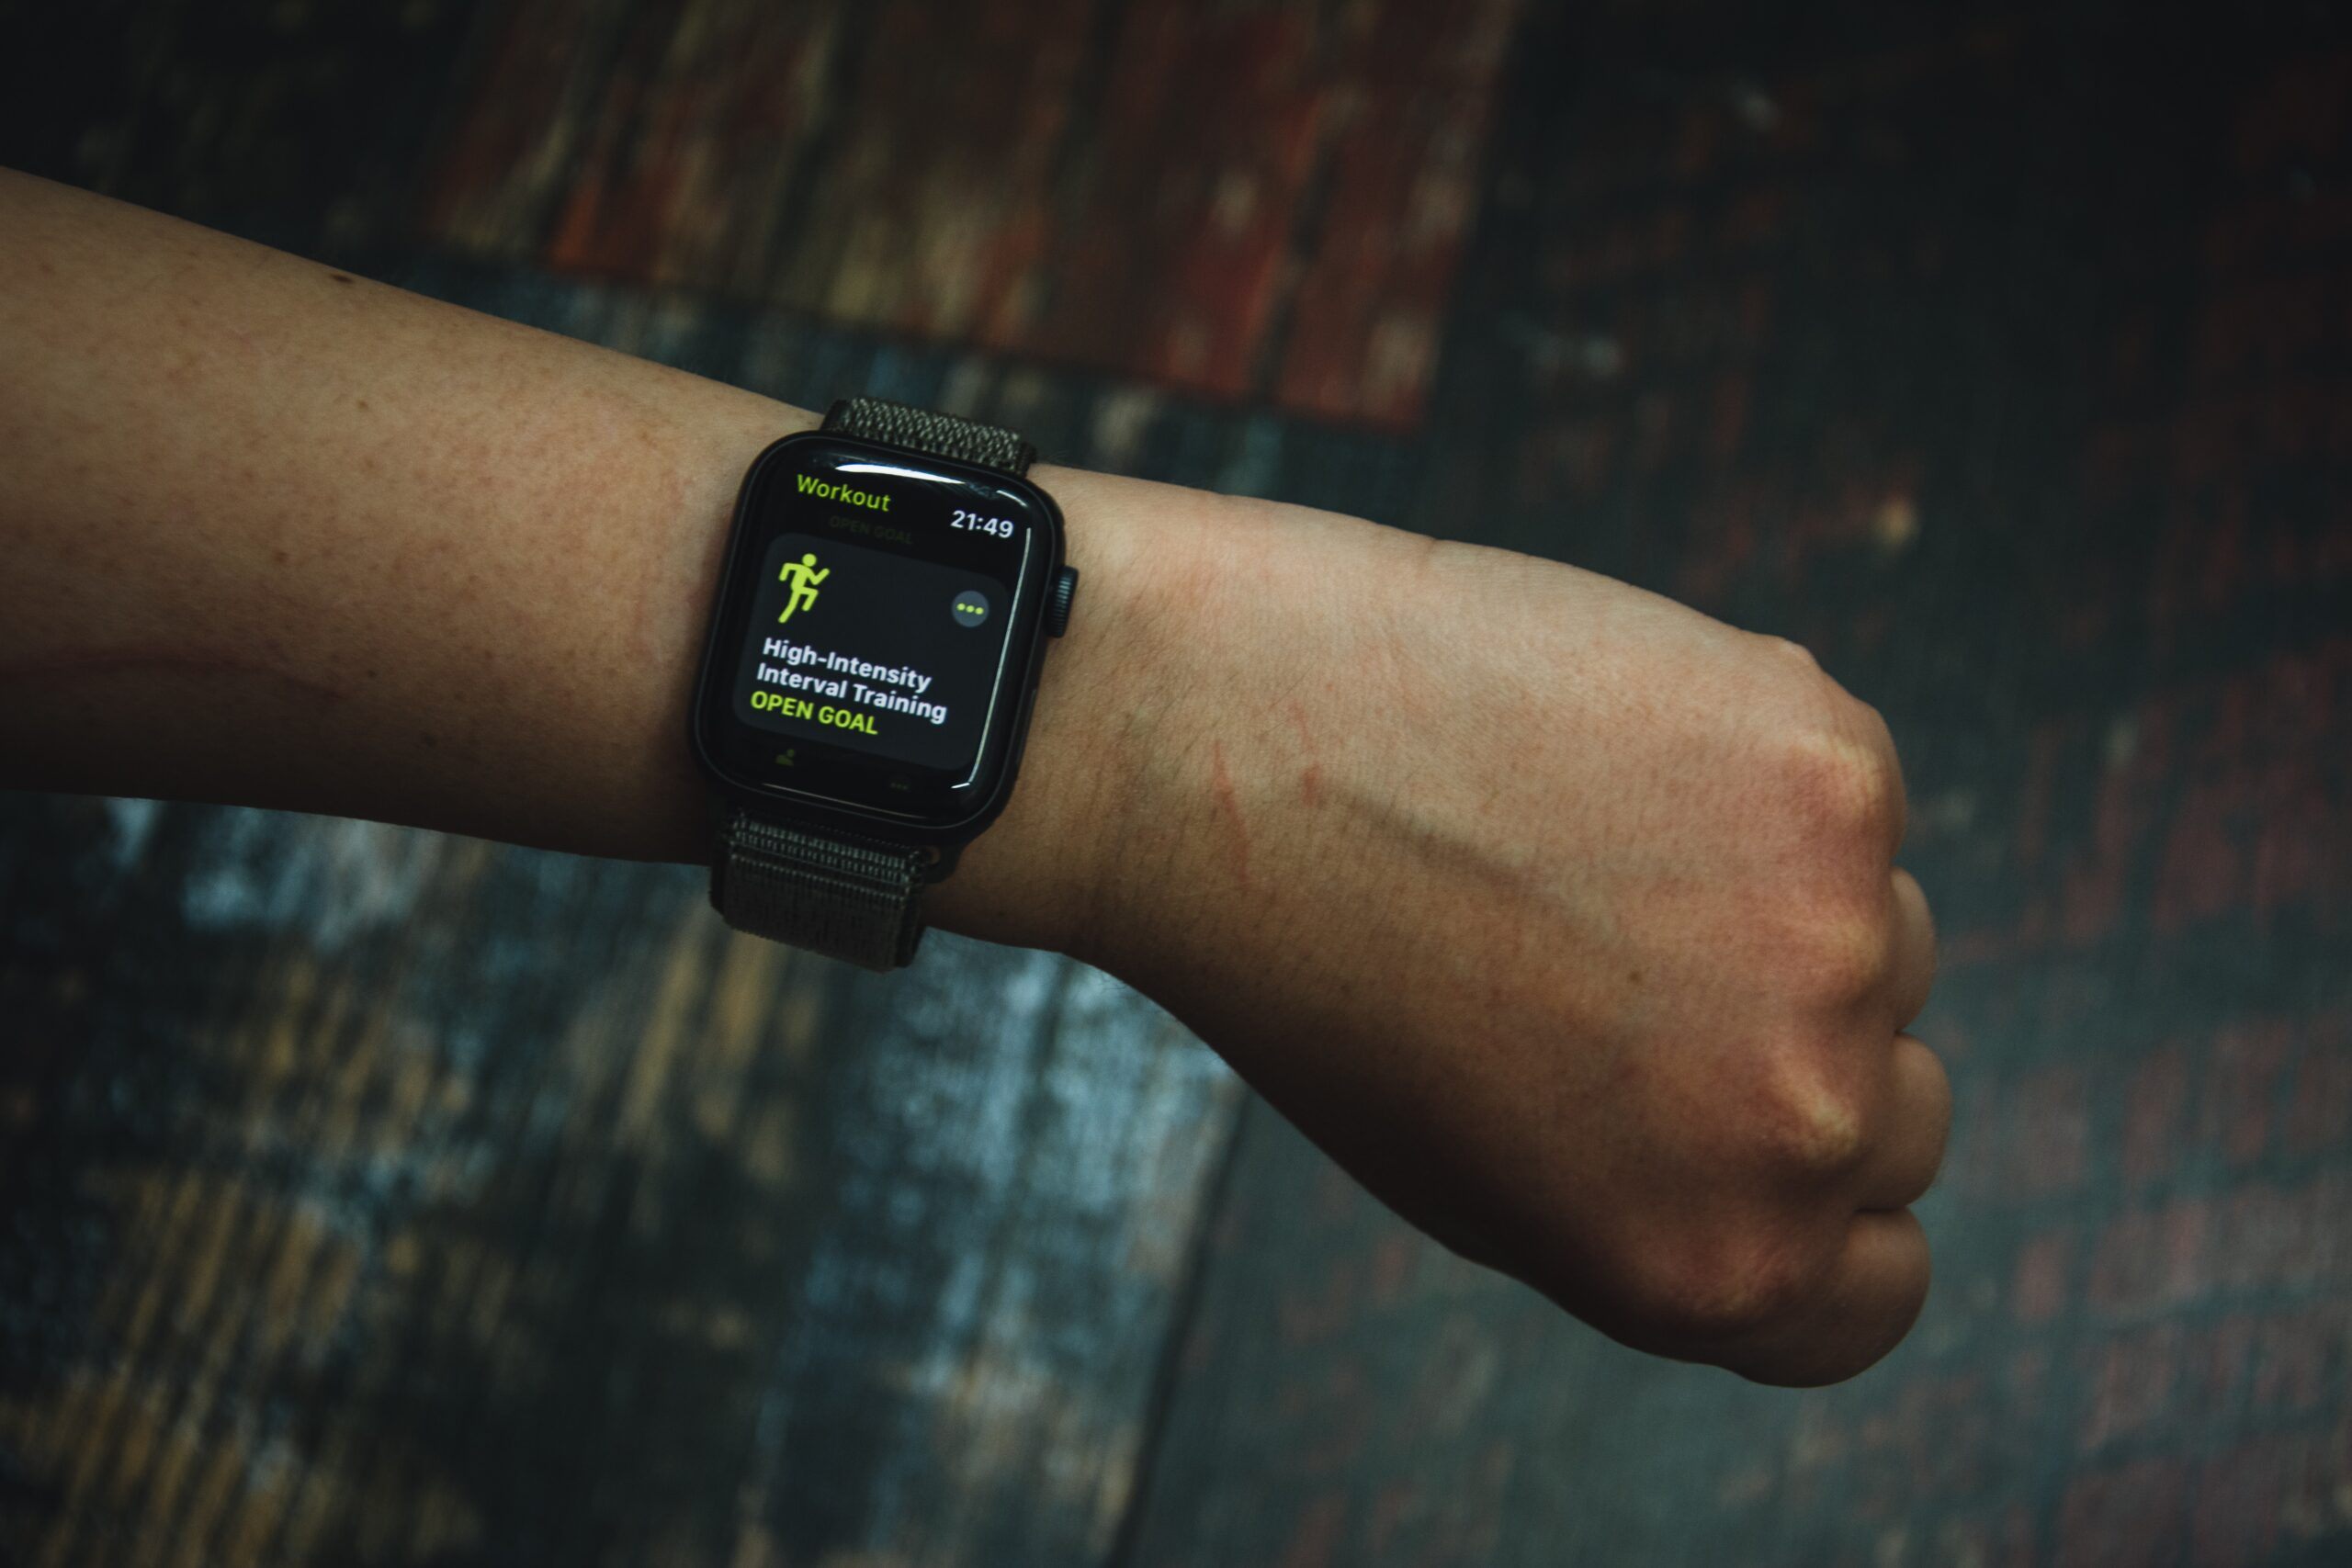 A black smartwatch worn on a user's wrist displays exercise data